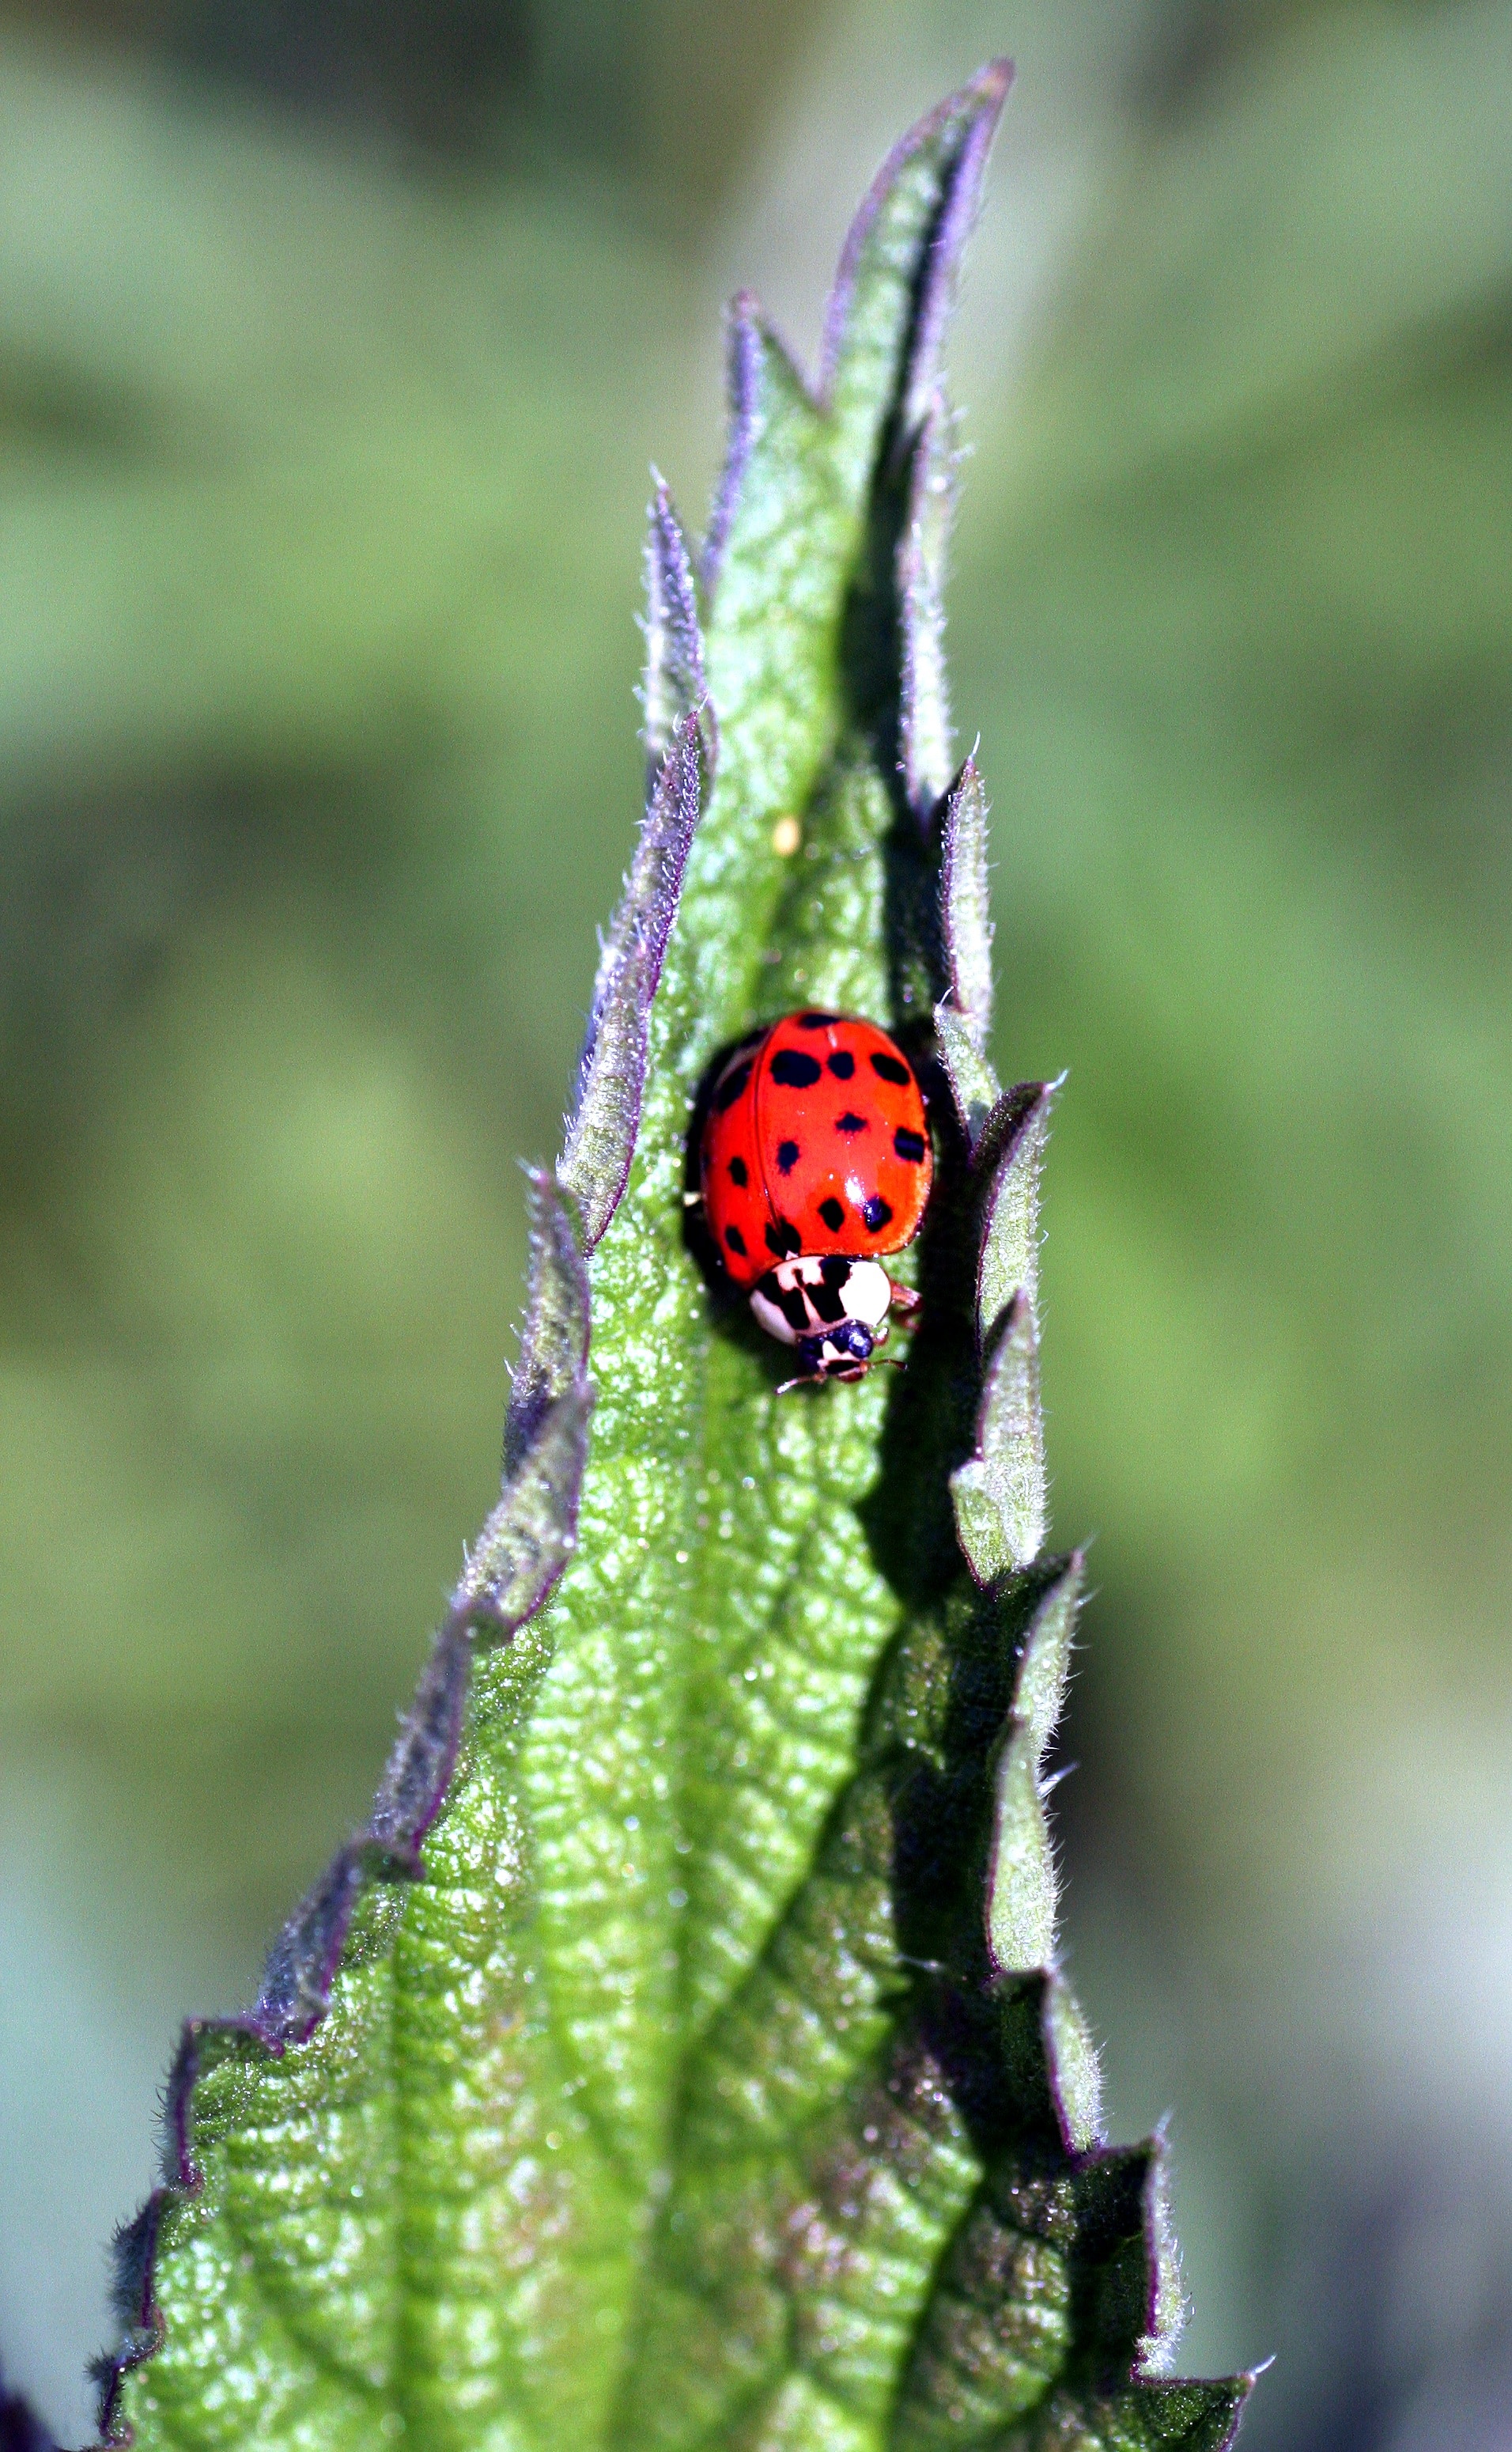 Red, Insect, Ladybug, Nature, Spring, insect, ladybug